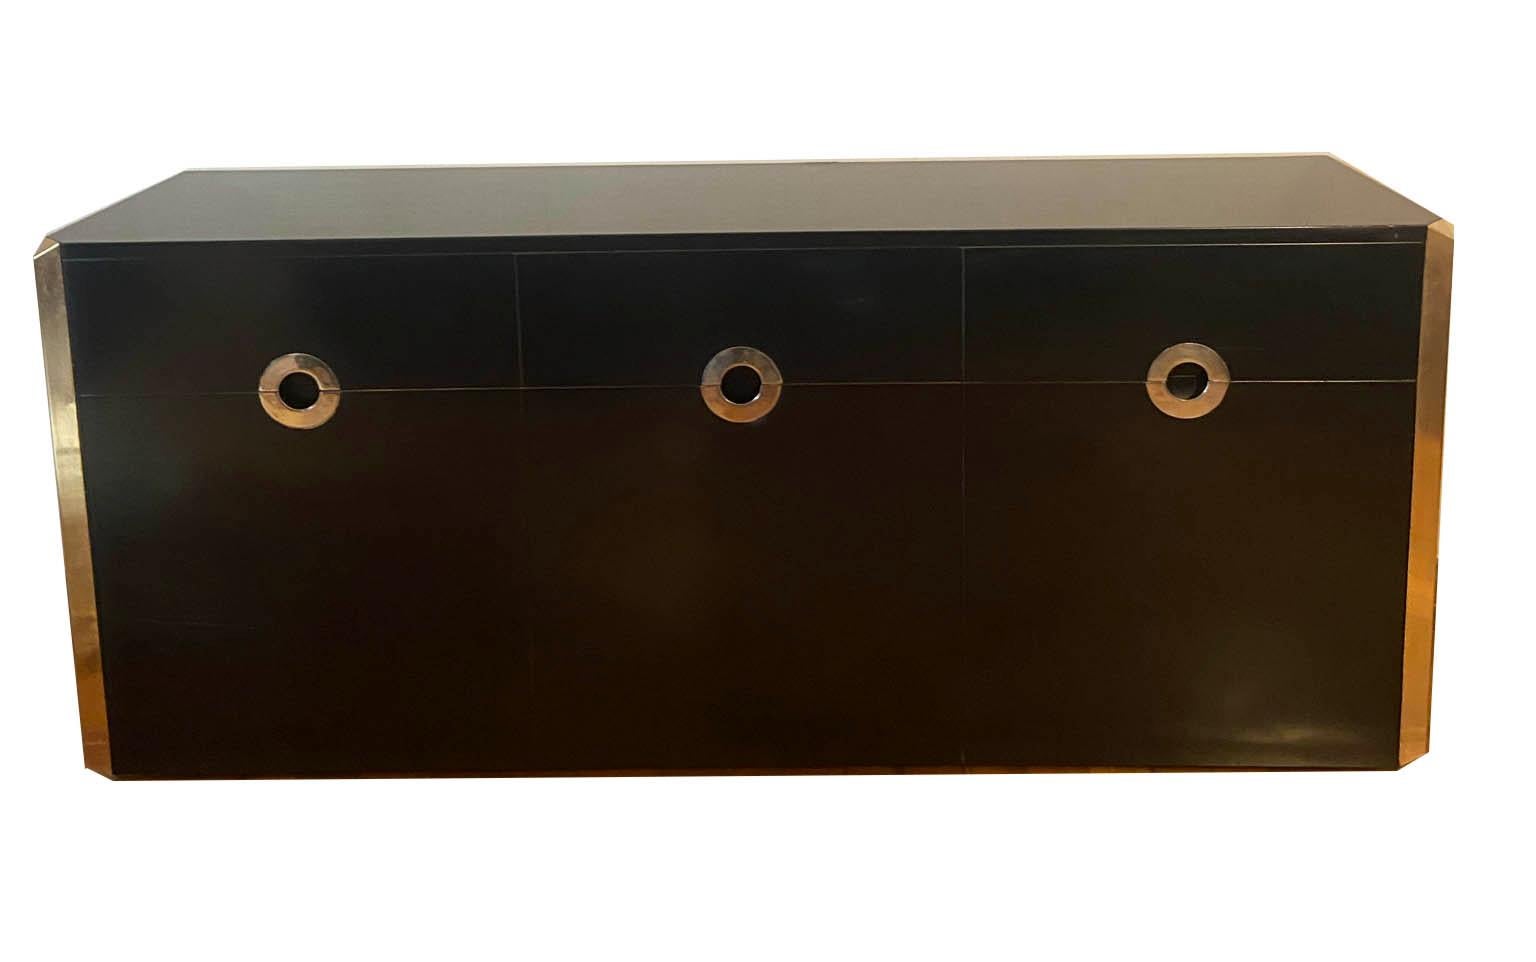 Sideboard in satin black lacquered wood with brass profiles and chromed metal handles by Willy Rizzo for Mario Sabot, Italy, 1972. An iconic piece by Willy Rizzo in excellent condition. It has two opening side doors, one centre drop-down door and